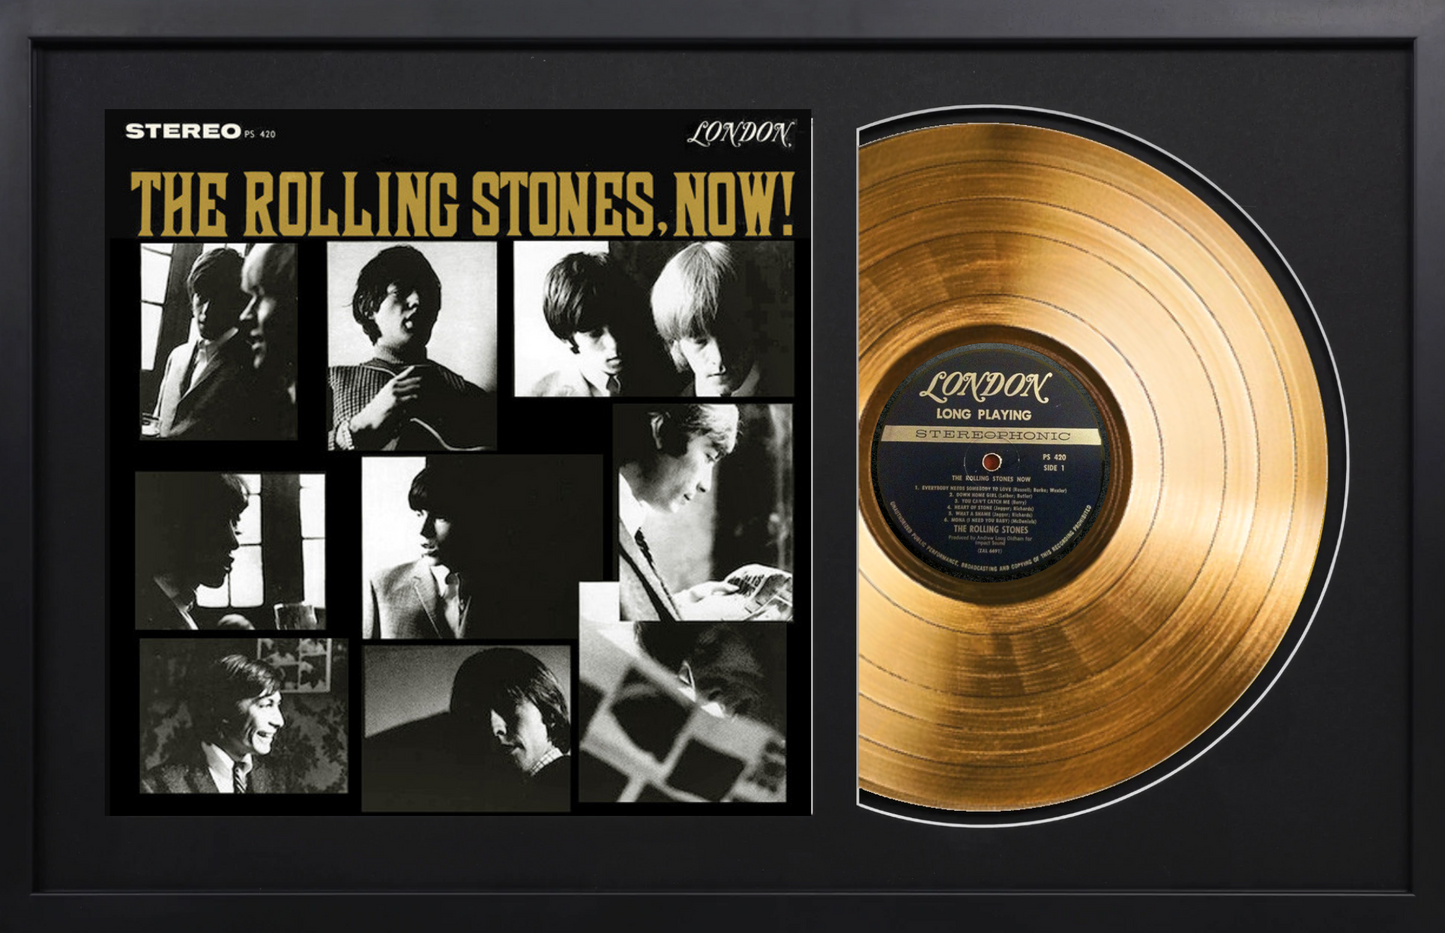 The Rolling Stones - The Rolling Stones, Now! - 14K Gold Framed Album